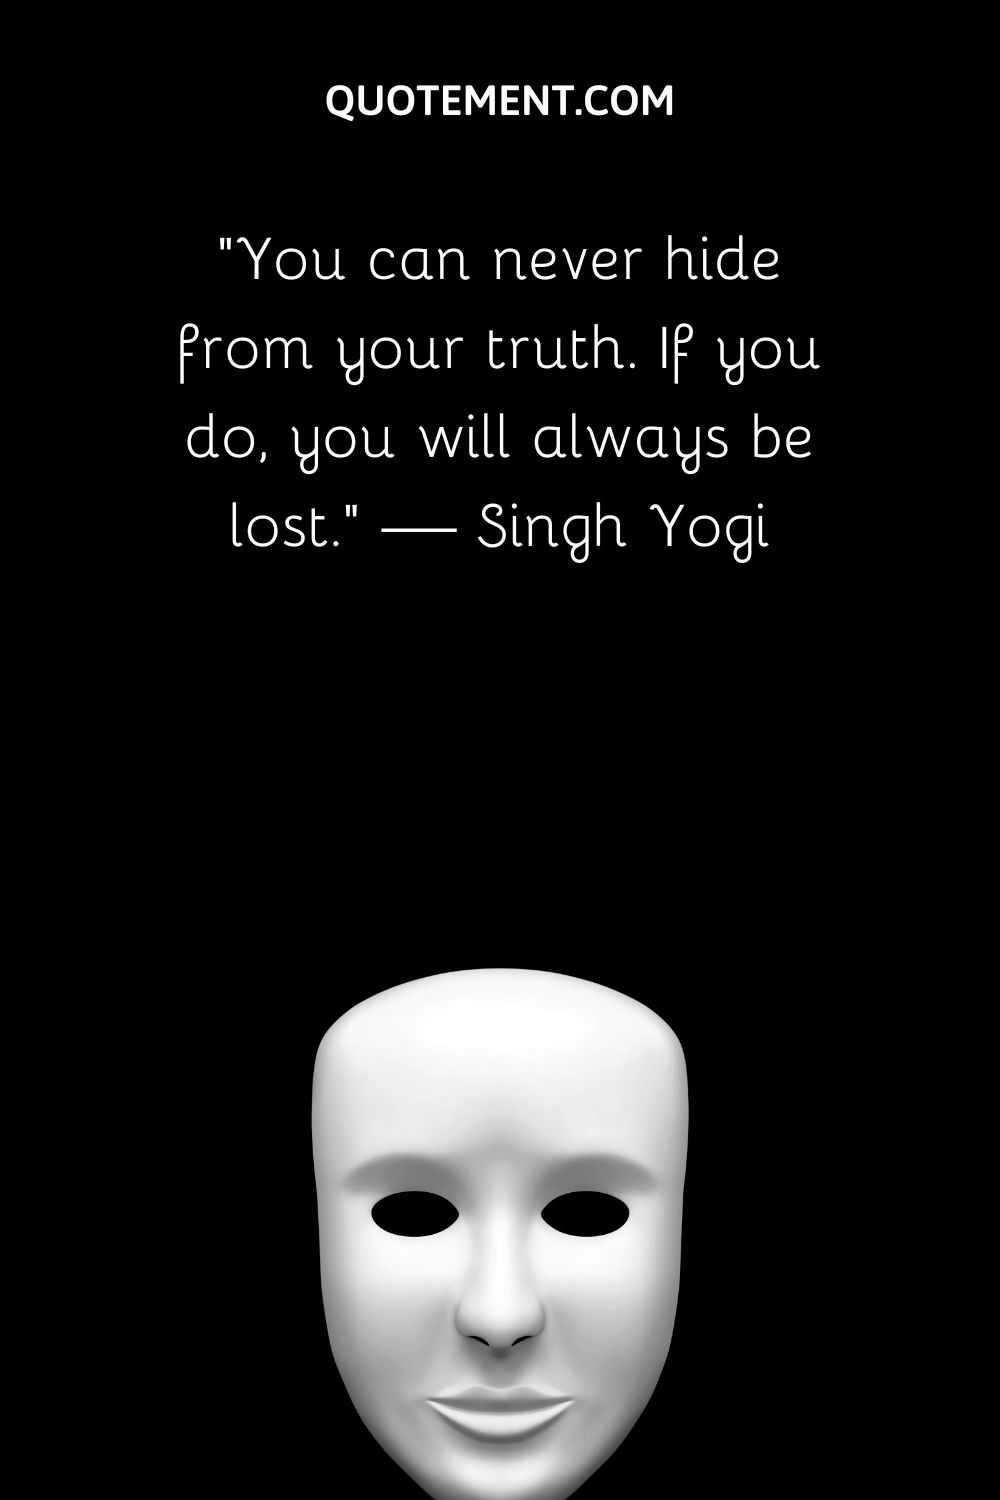 You can never hide from your truth. If you do, you will always be lost